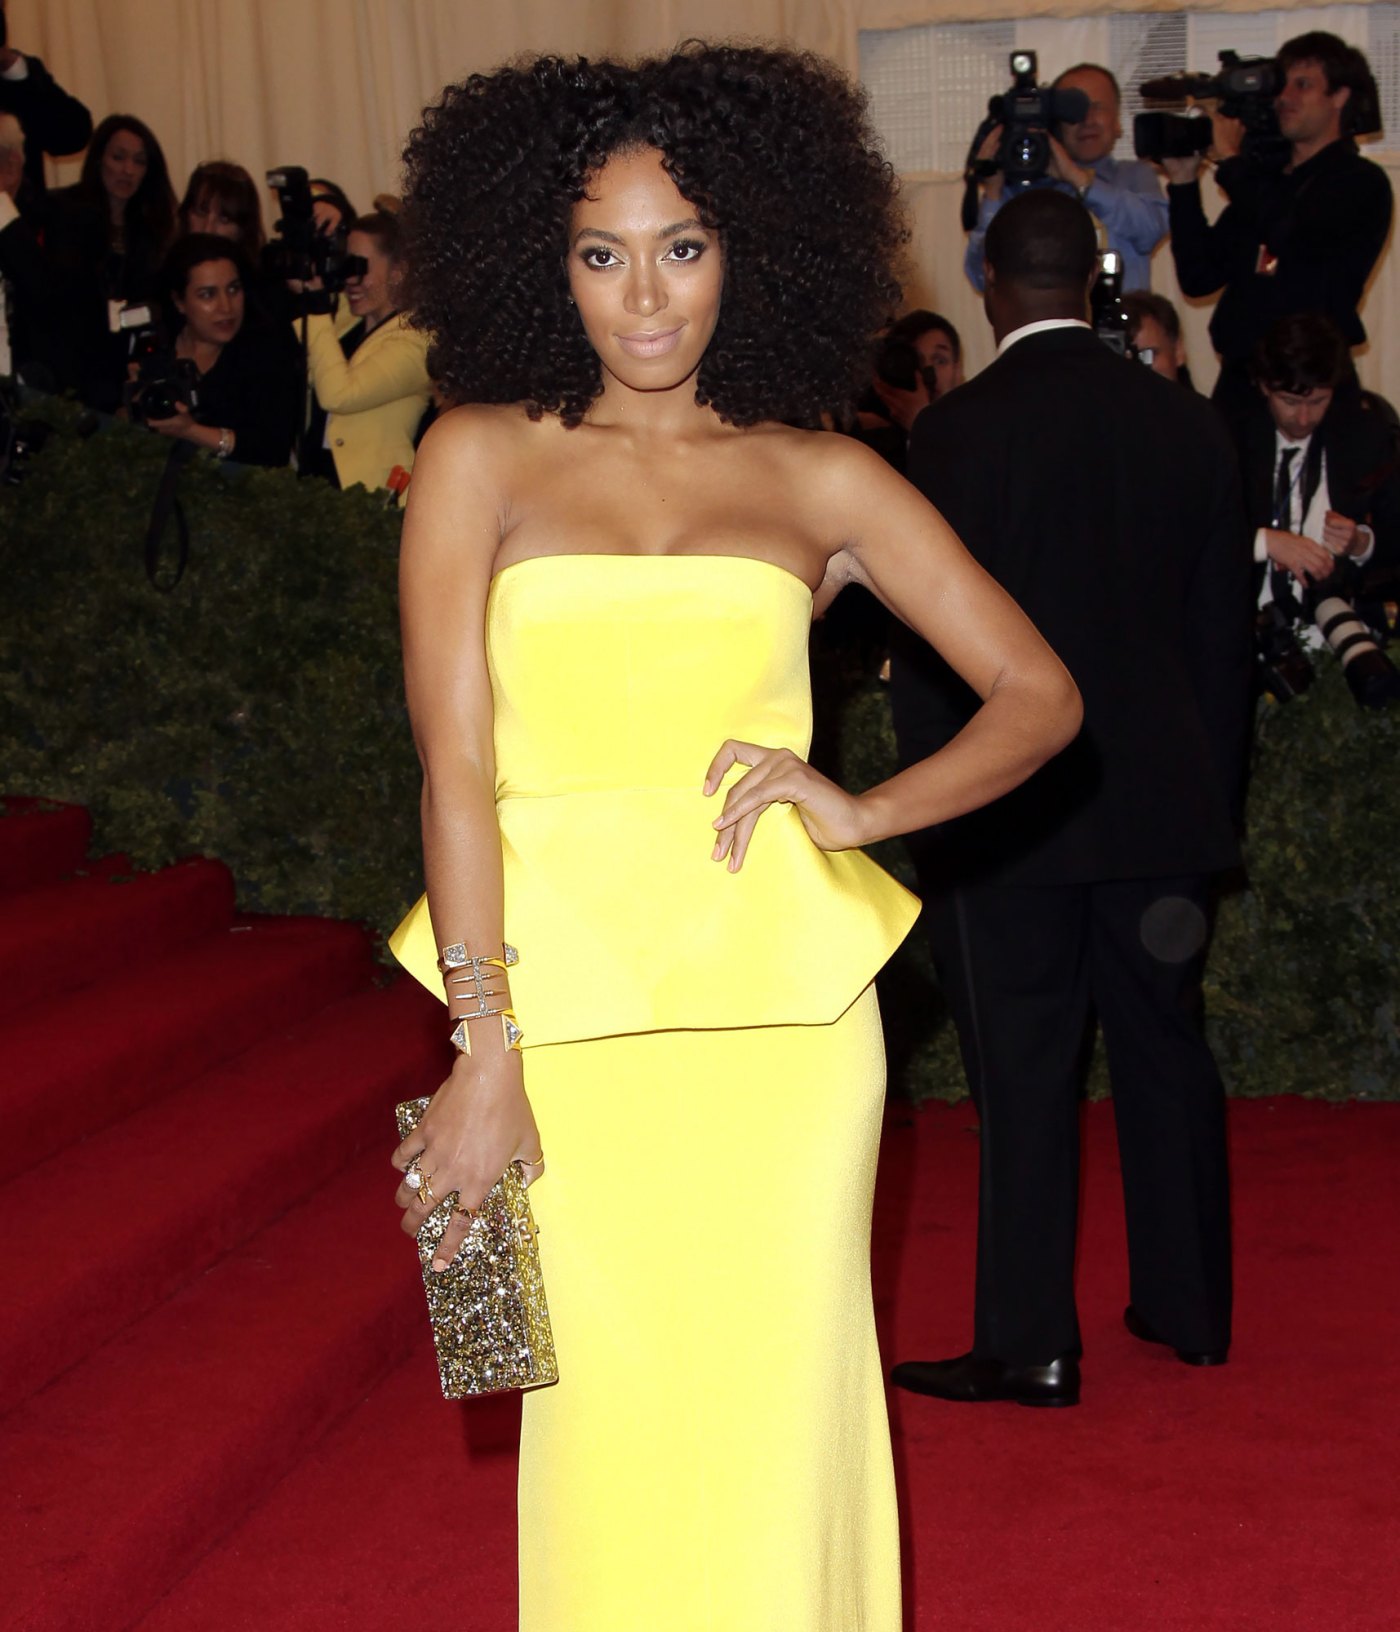 Solange Knowles Yelled at Rachel Roy Before Jay Z Fight After Met Gala